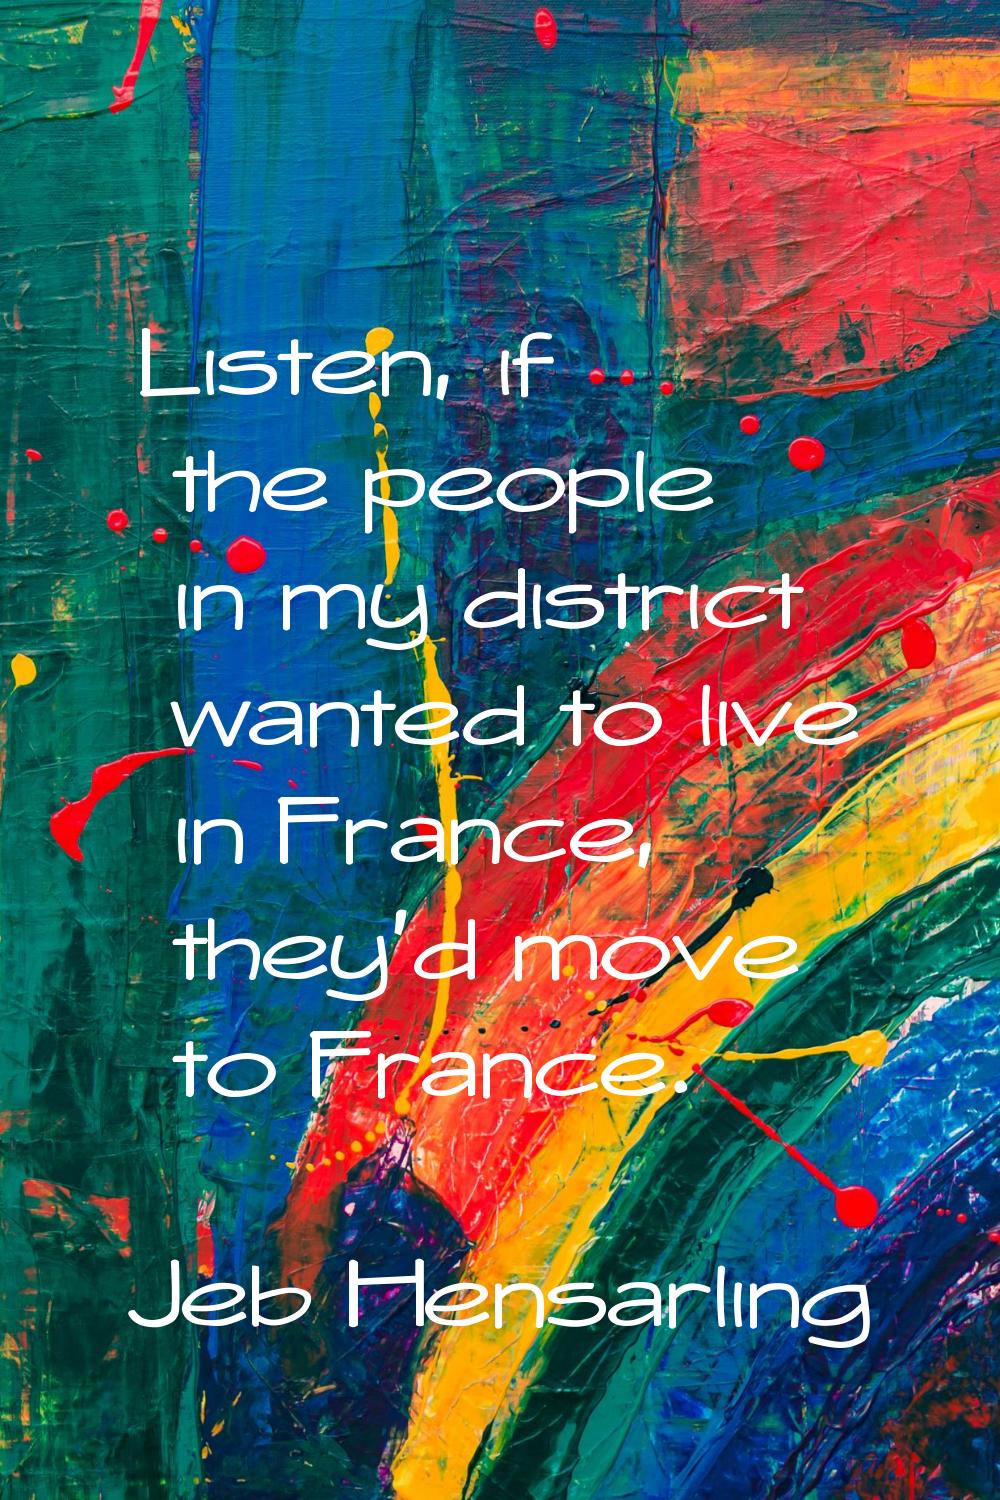 Listen, if the people in my district wanted to live in France, they'd move to France.